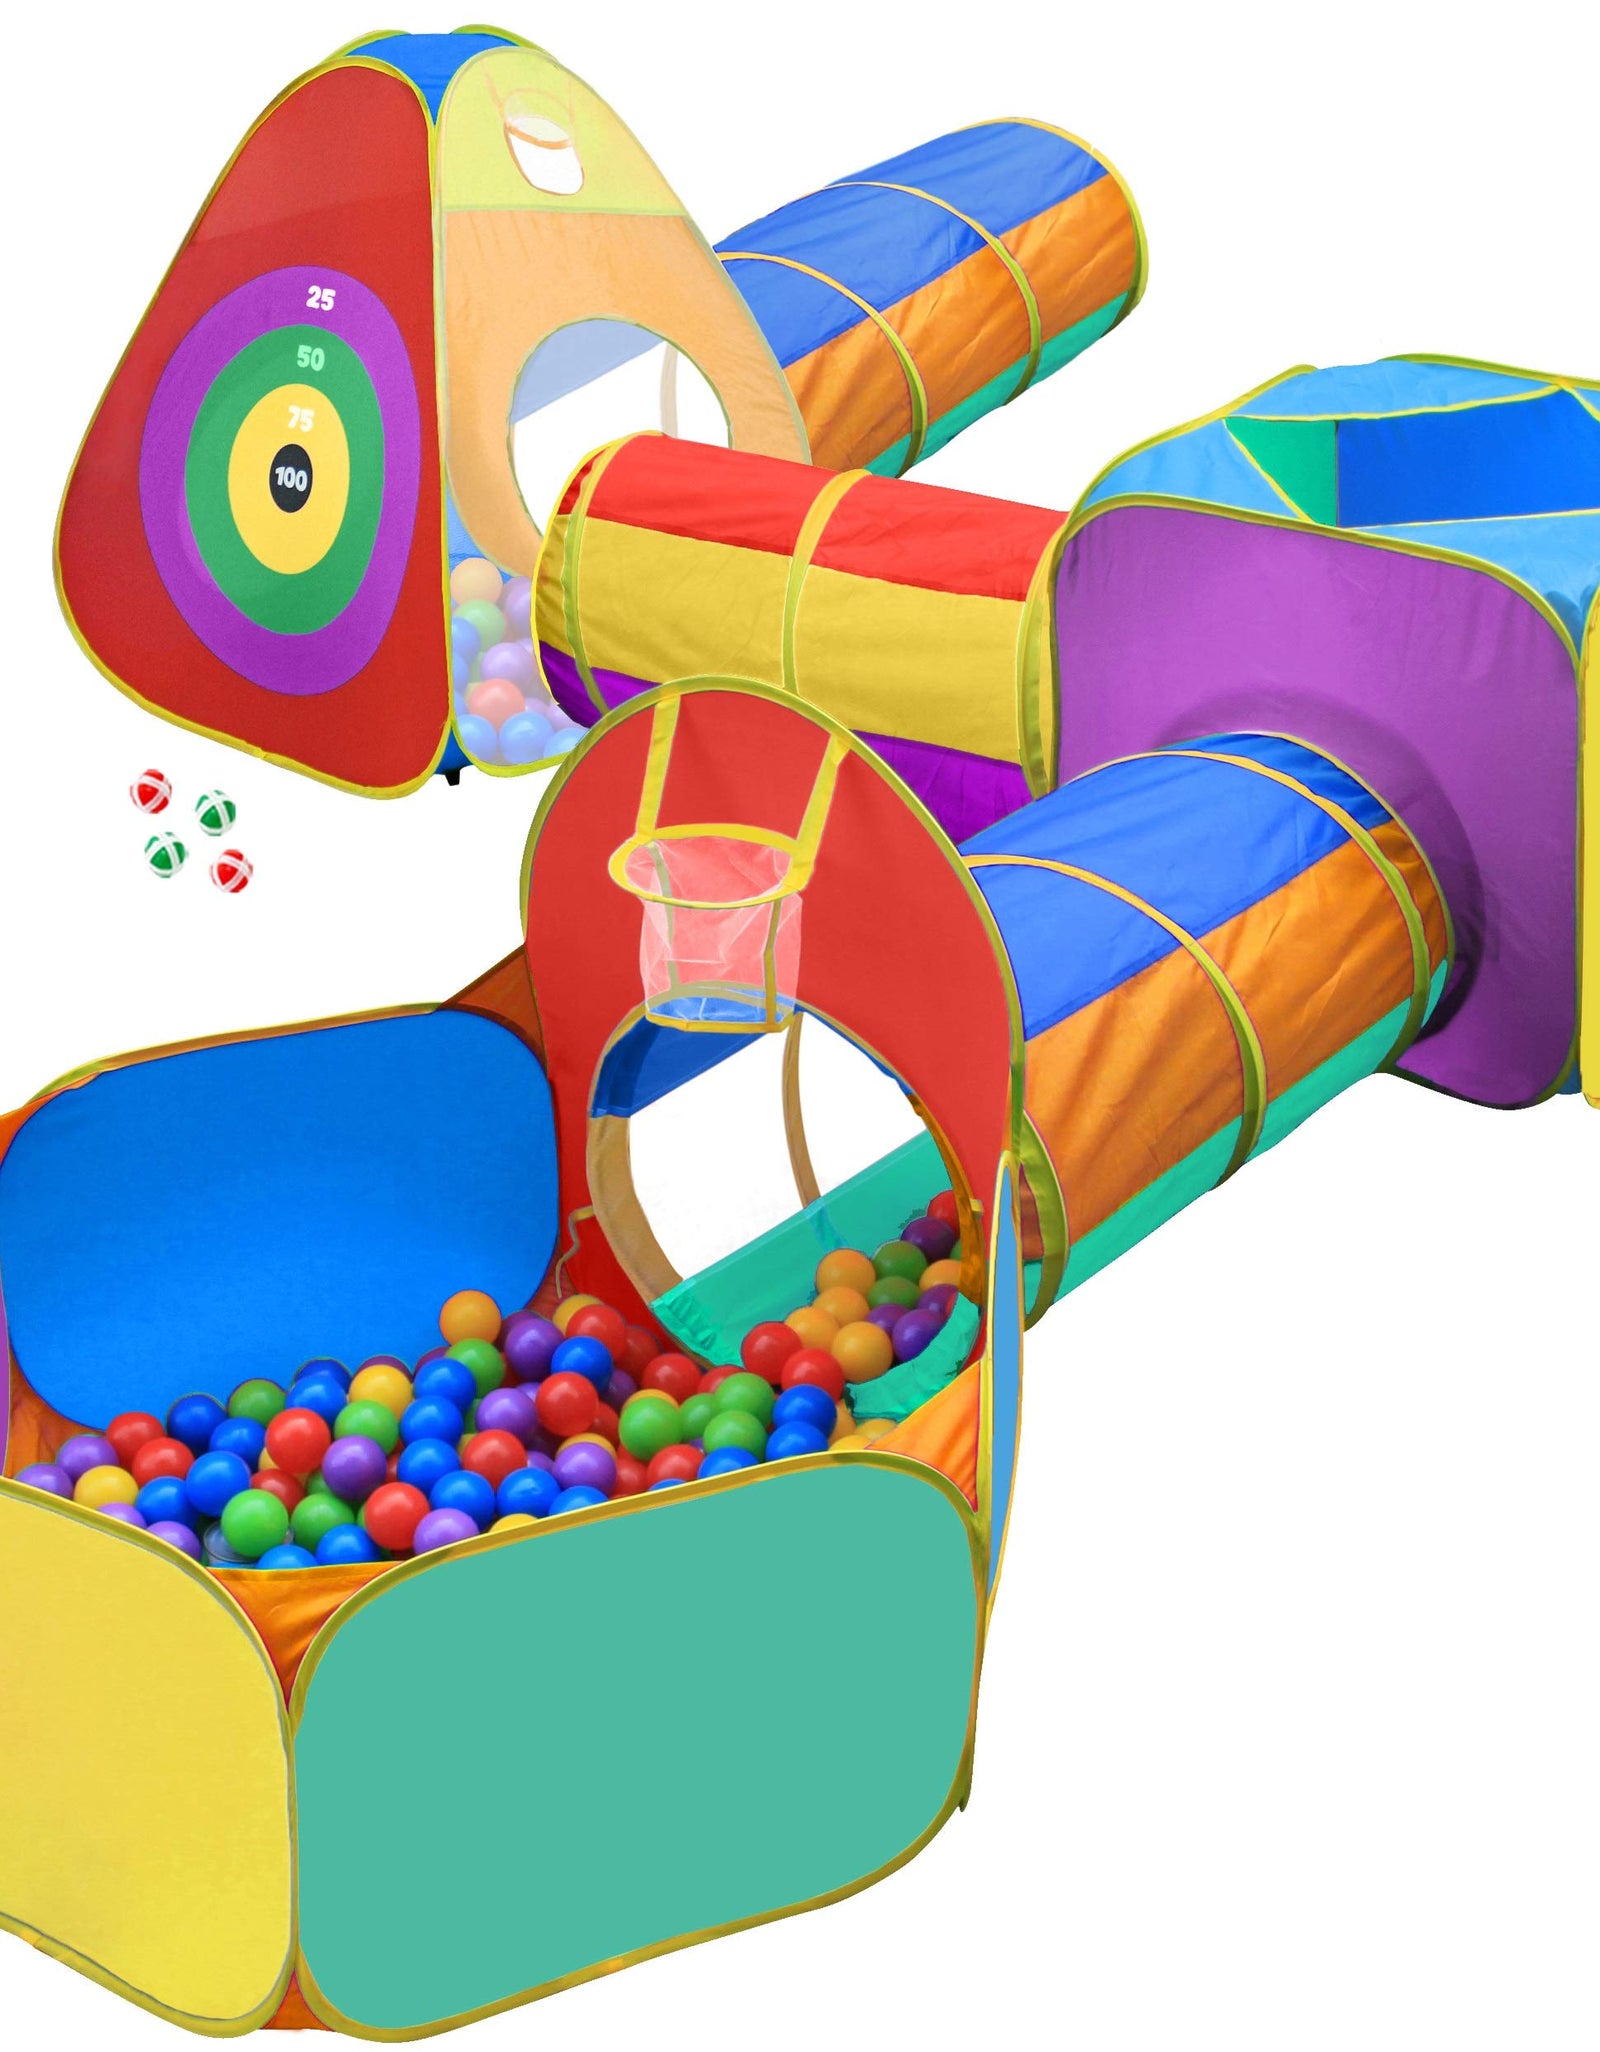 Gift for Toddler Boys & Girls, Ball Pit, Play Tent and Tunnels for Kids, Best Birthday Gift for 1 2 3 4 5 Year Old Pop Up Baby Play Toy, Target Game w/ 4 Darts Indoor & Outdoor